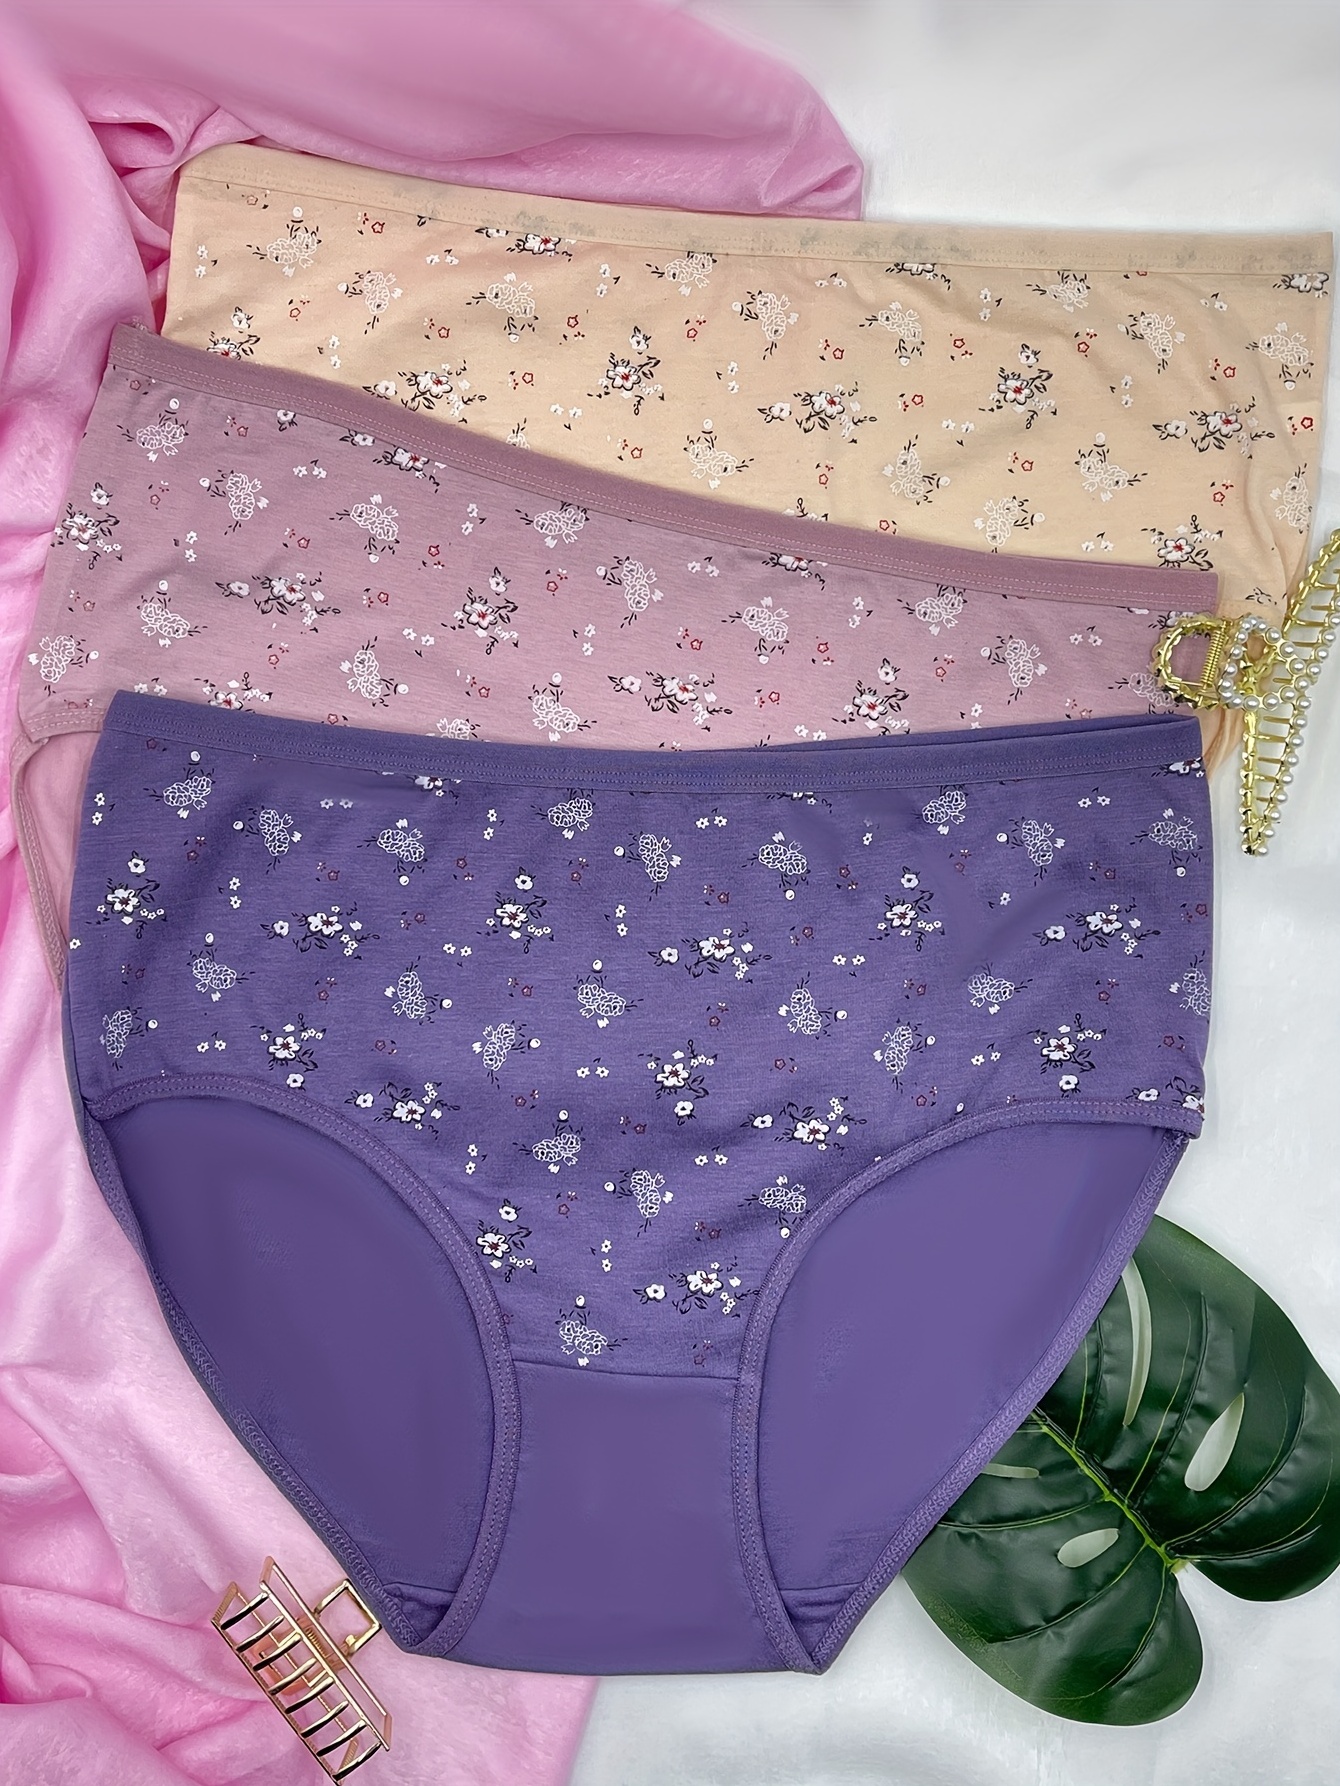 3 Pcs Floral Print Briefs, Mother's Day Gift, Cute & Comfy Medium Stretch  Intimates Panties, Women's Underwear & Lingerie